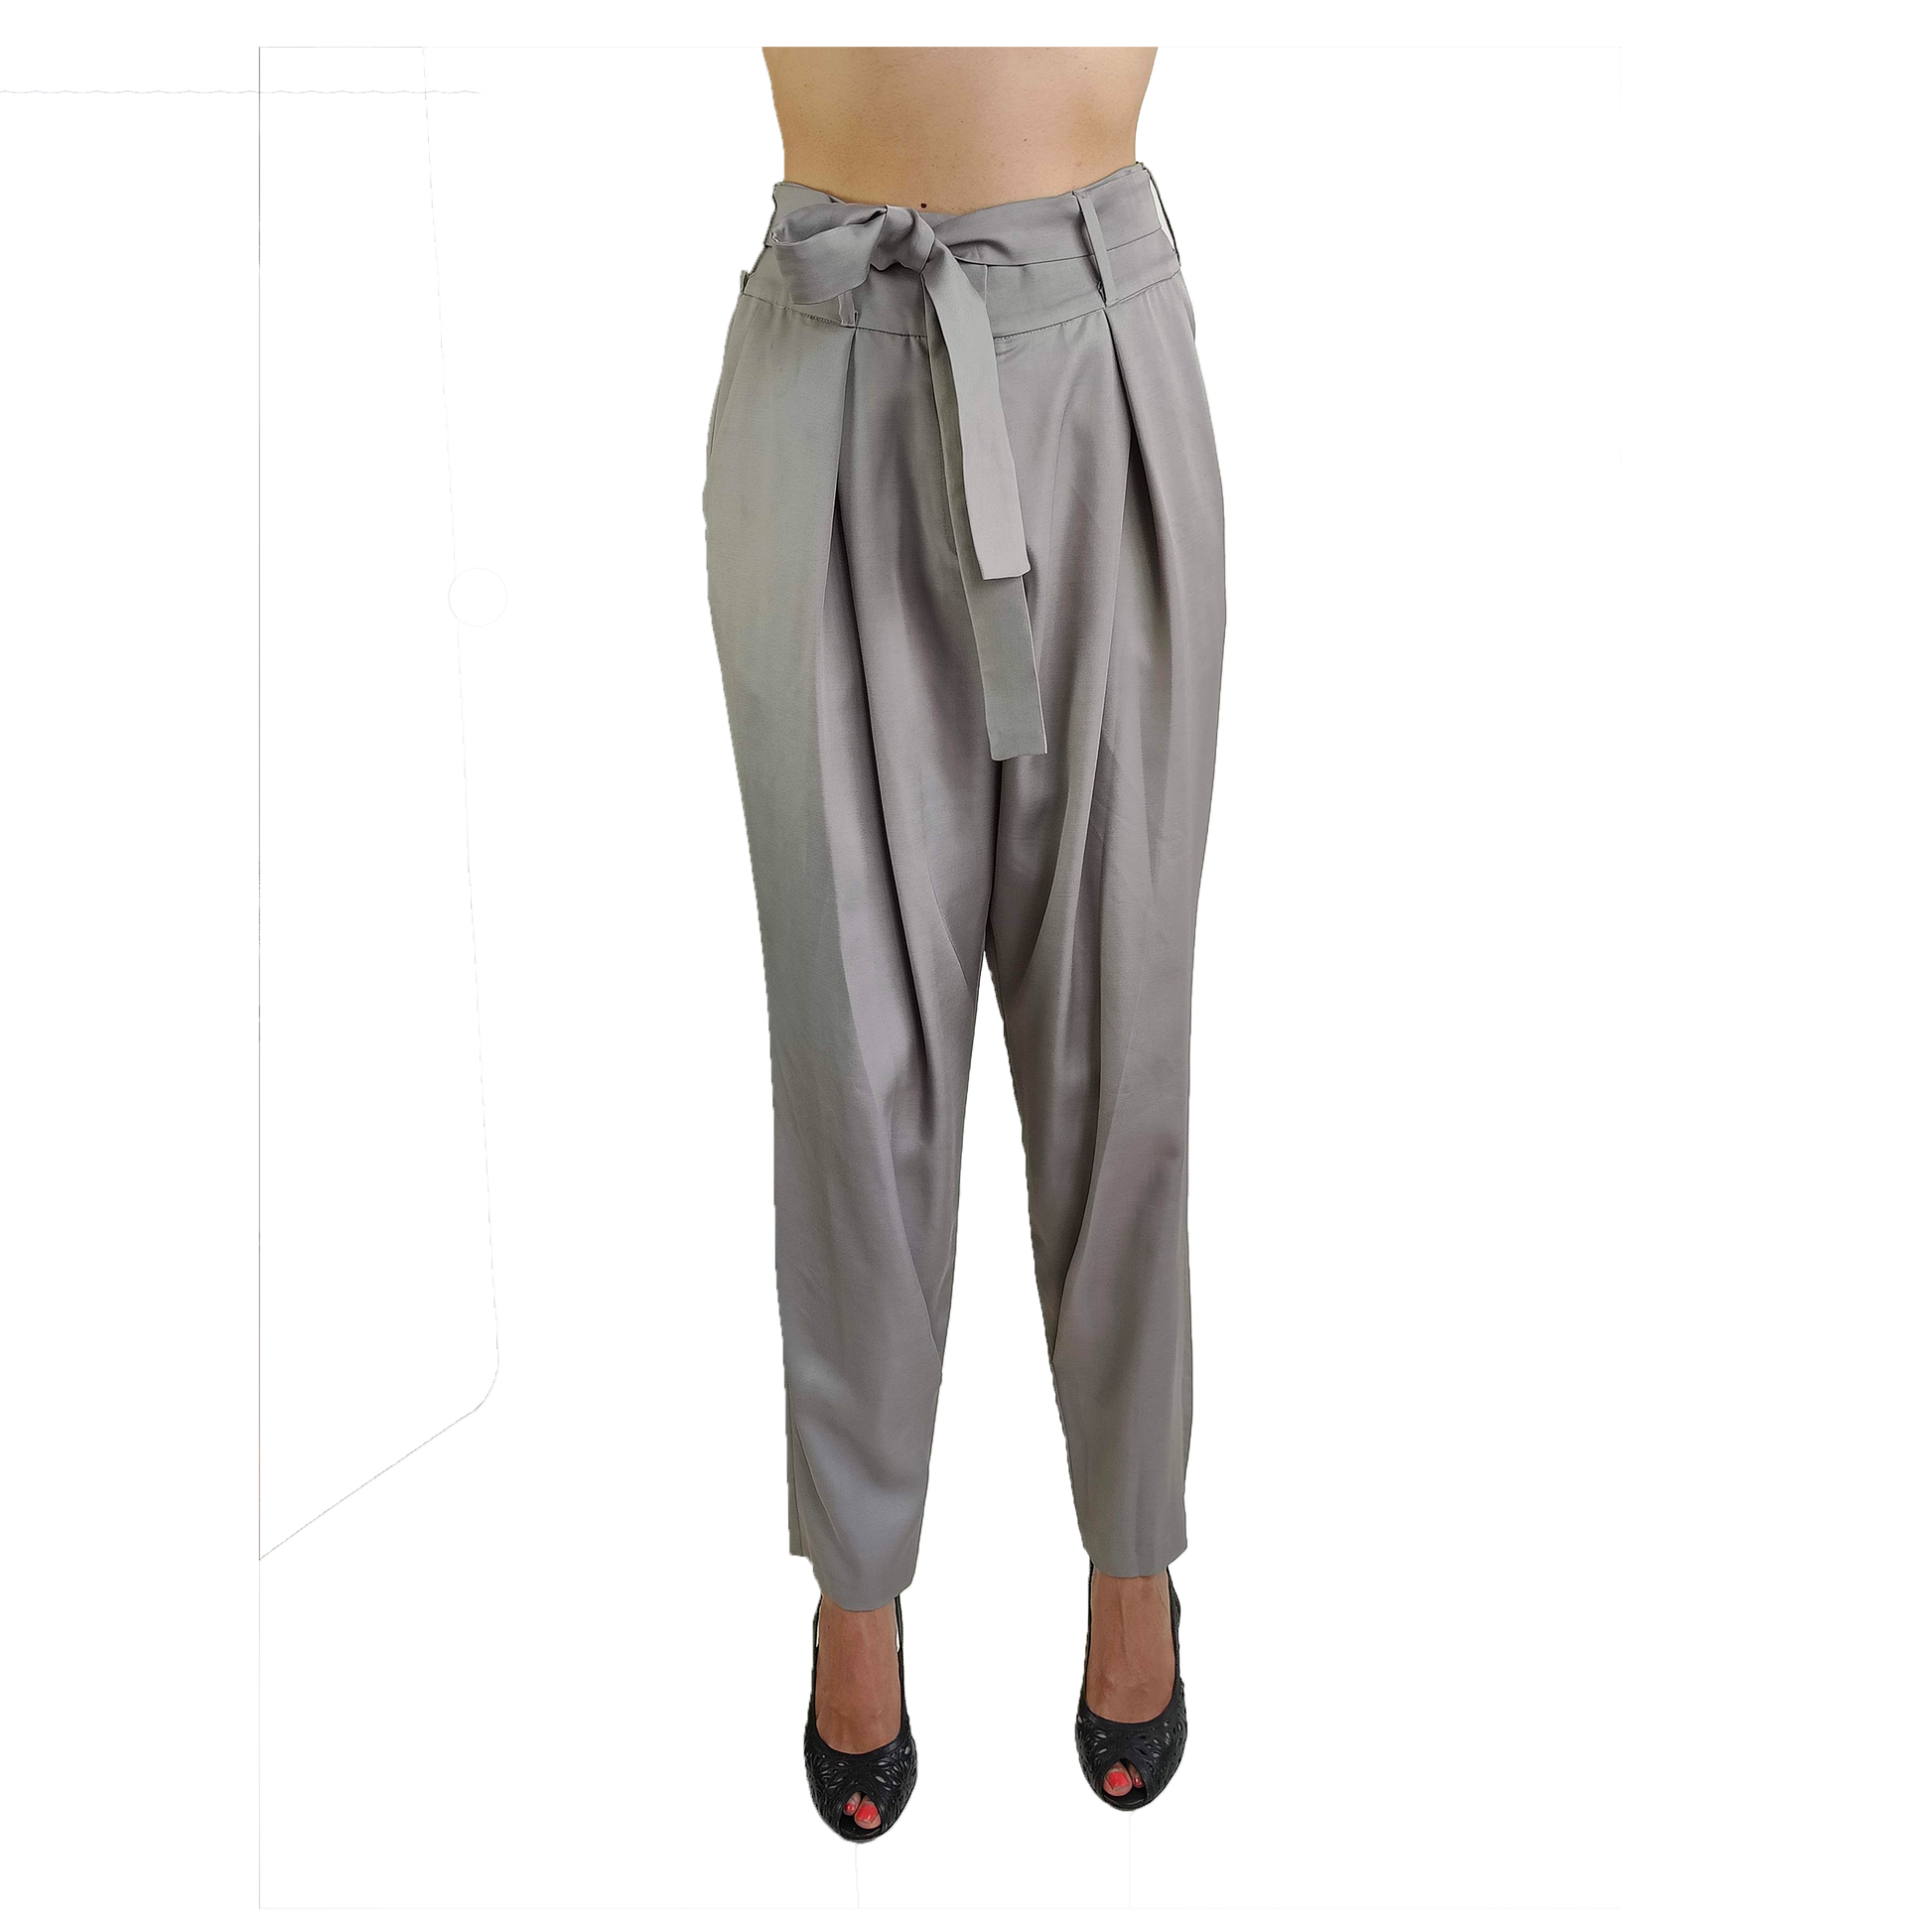 Gray low crotch pant in draping cotton viscose satin, including an optional tie belt